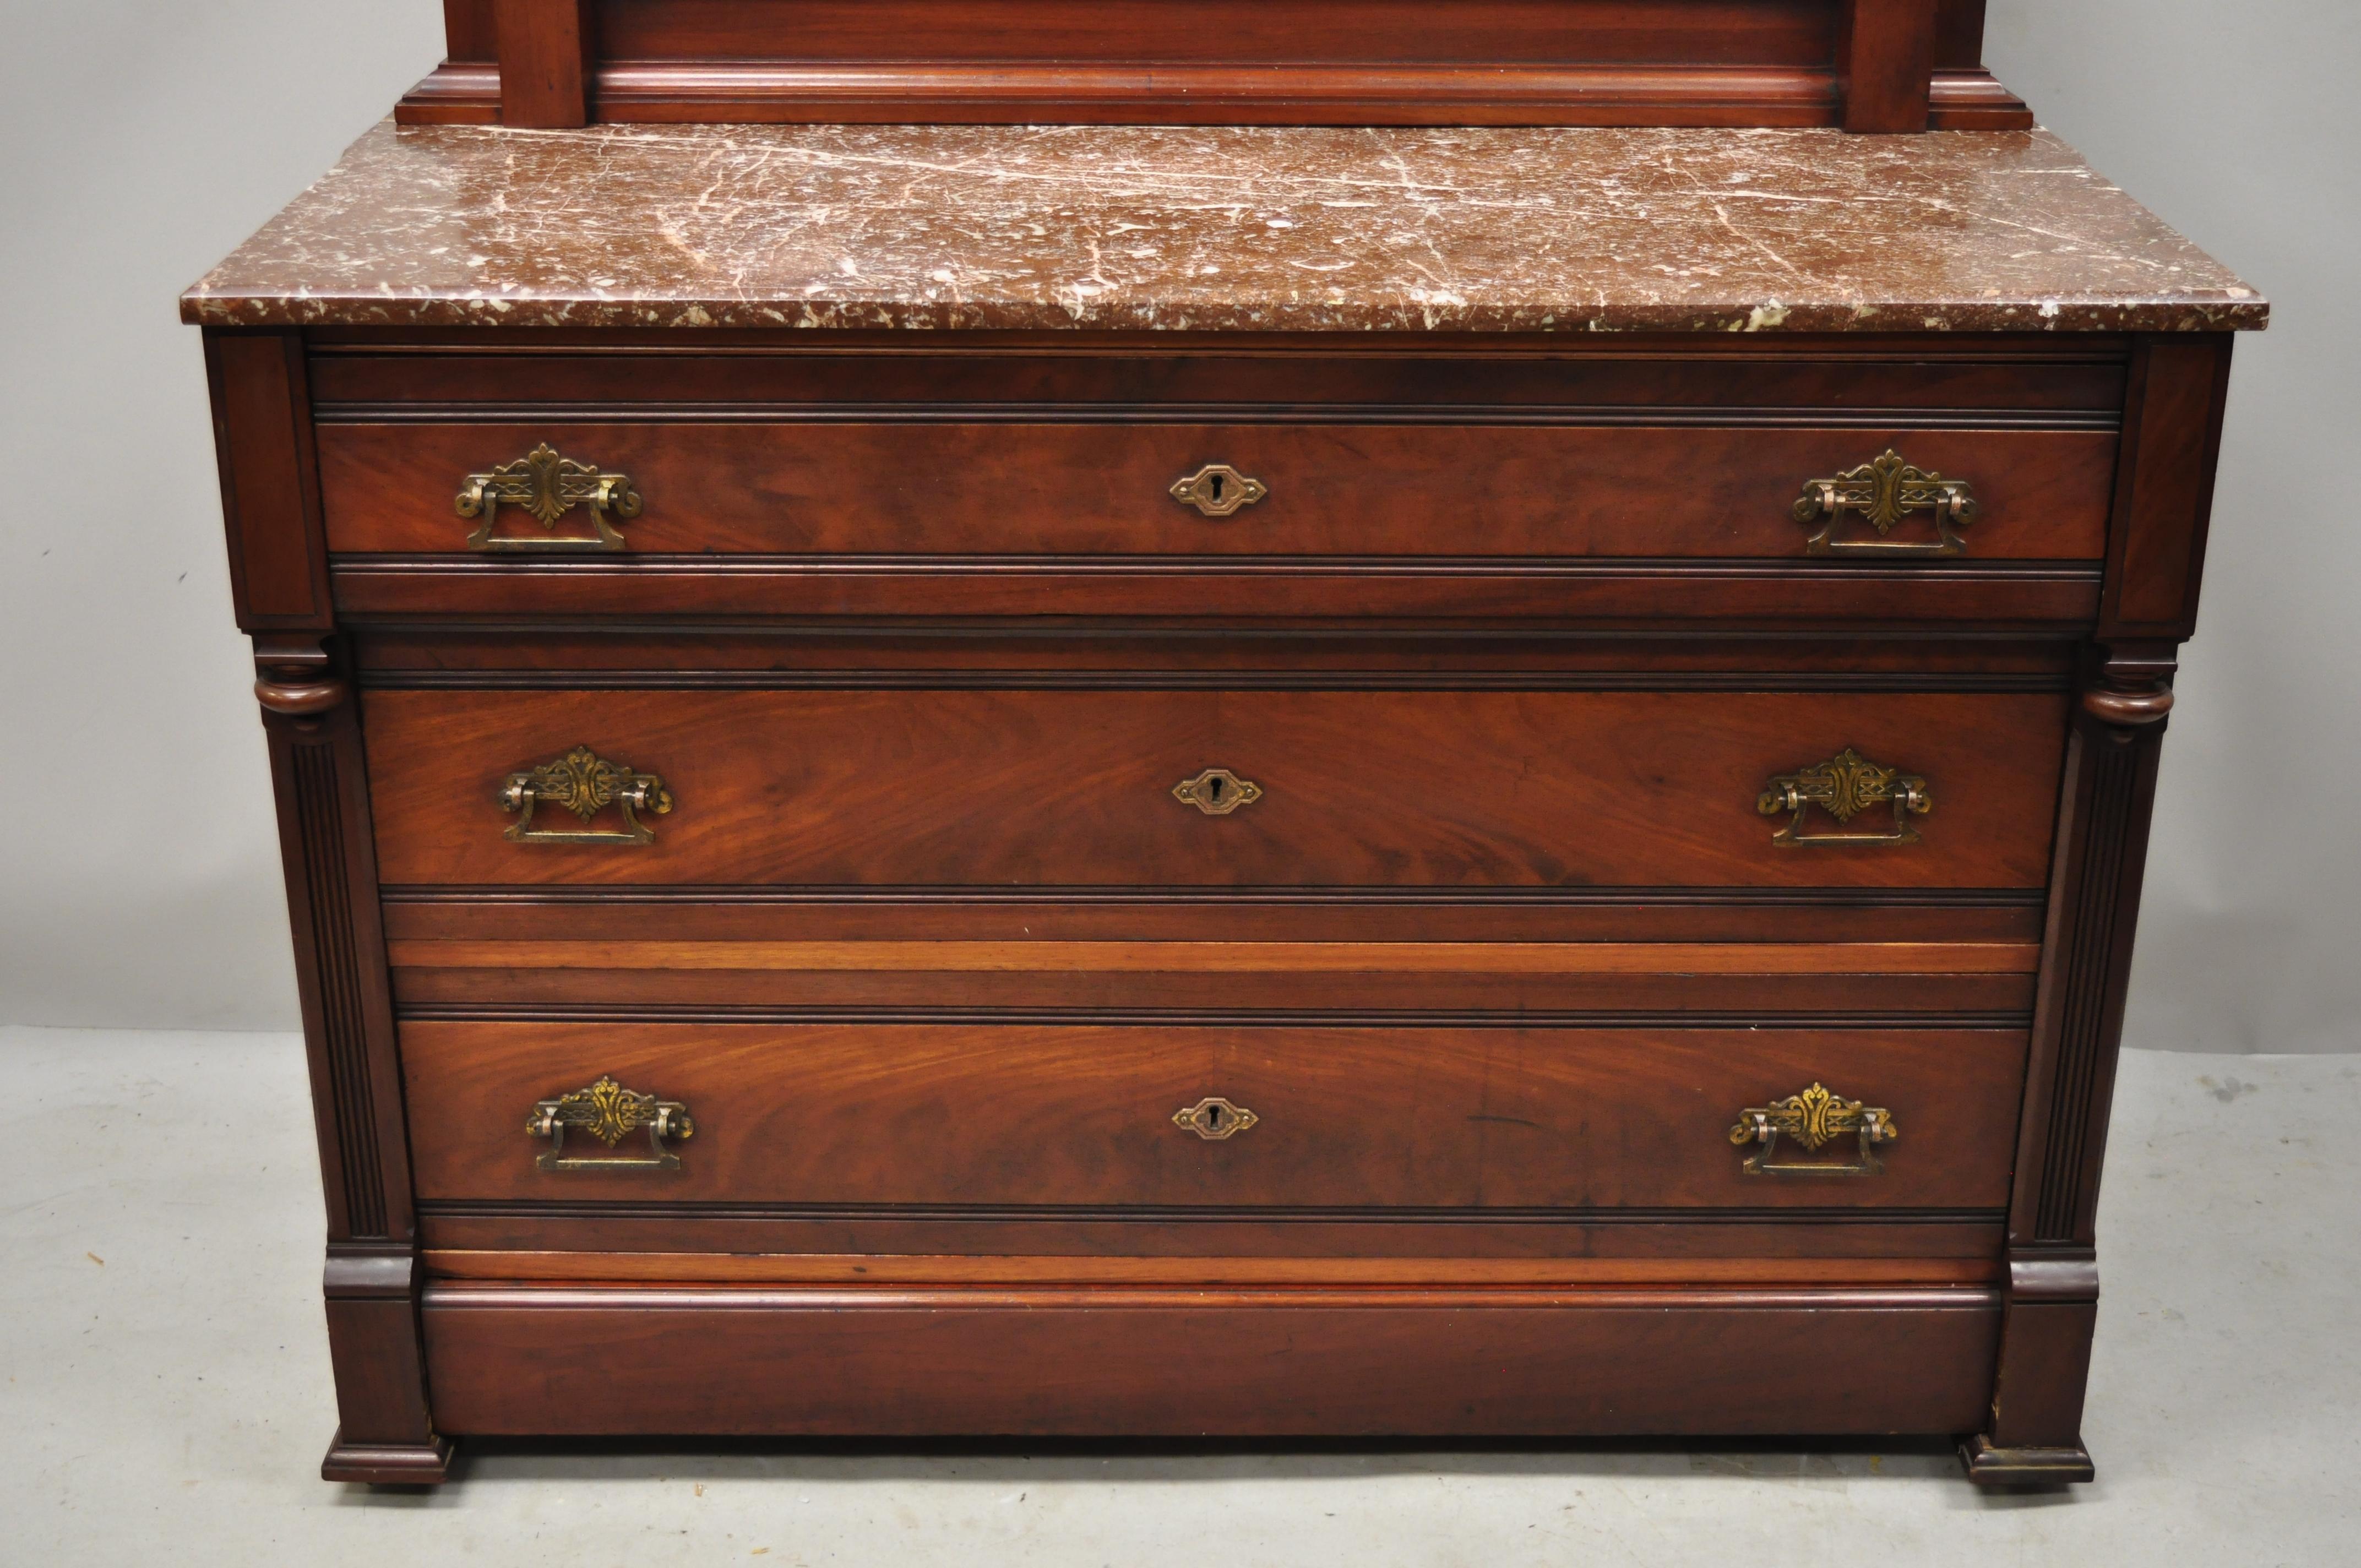 Antique American Eastlake Victorian marble-top walnut washstand dresser with mirror. Item features a marble-top, hidden lower drawer, hidden side drawer, solid wood construction, beautiful wood grain, nicely carved details, no key, but unlocked, 5